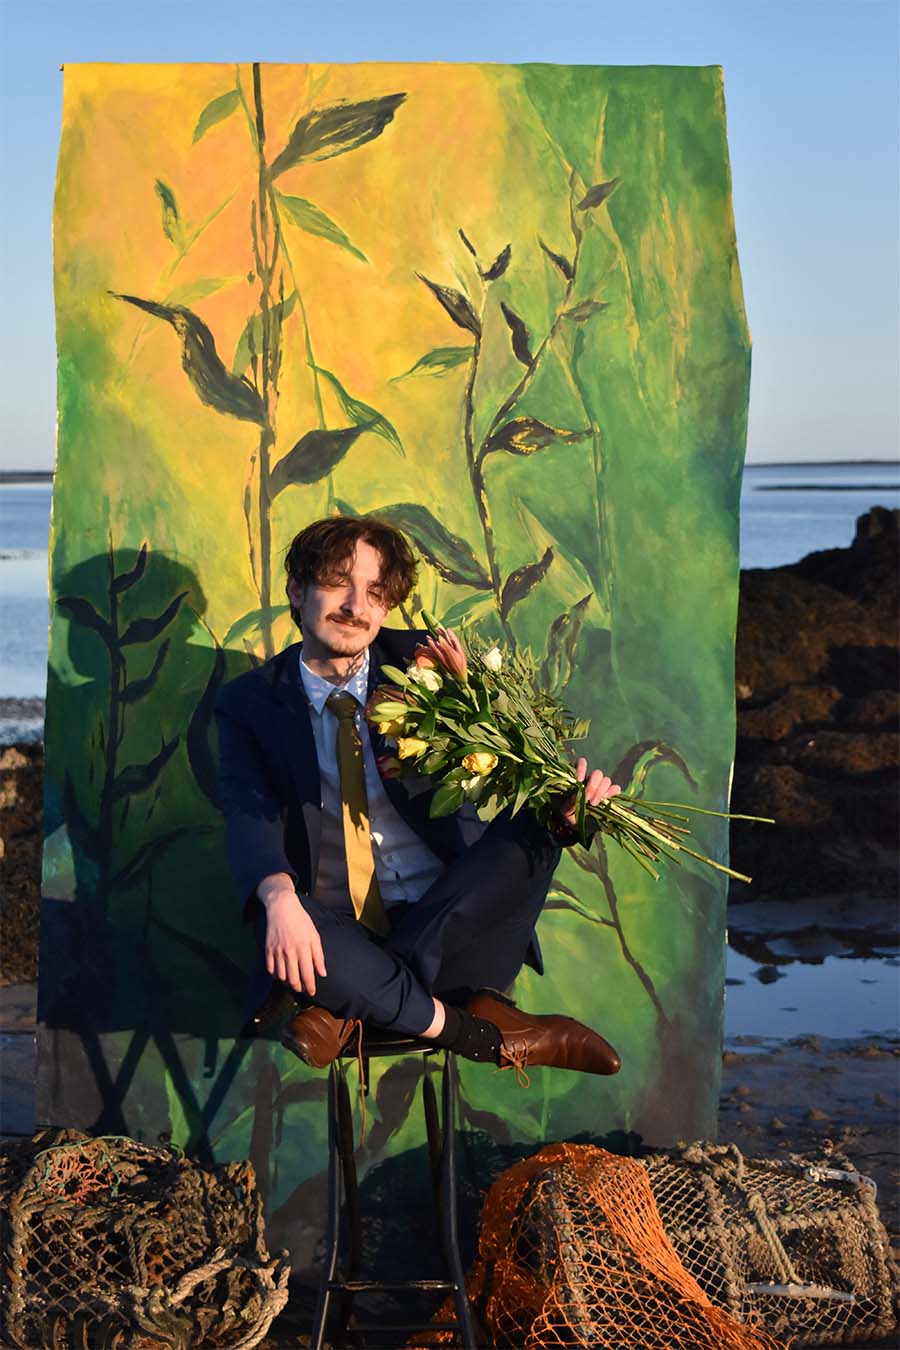 Model sits on a stool with his legs crossed, holding a bouquet of flowers and smiling. Behind him is a yellow and green painted backdrop of seaweed. At his feet are fishing nets.